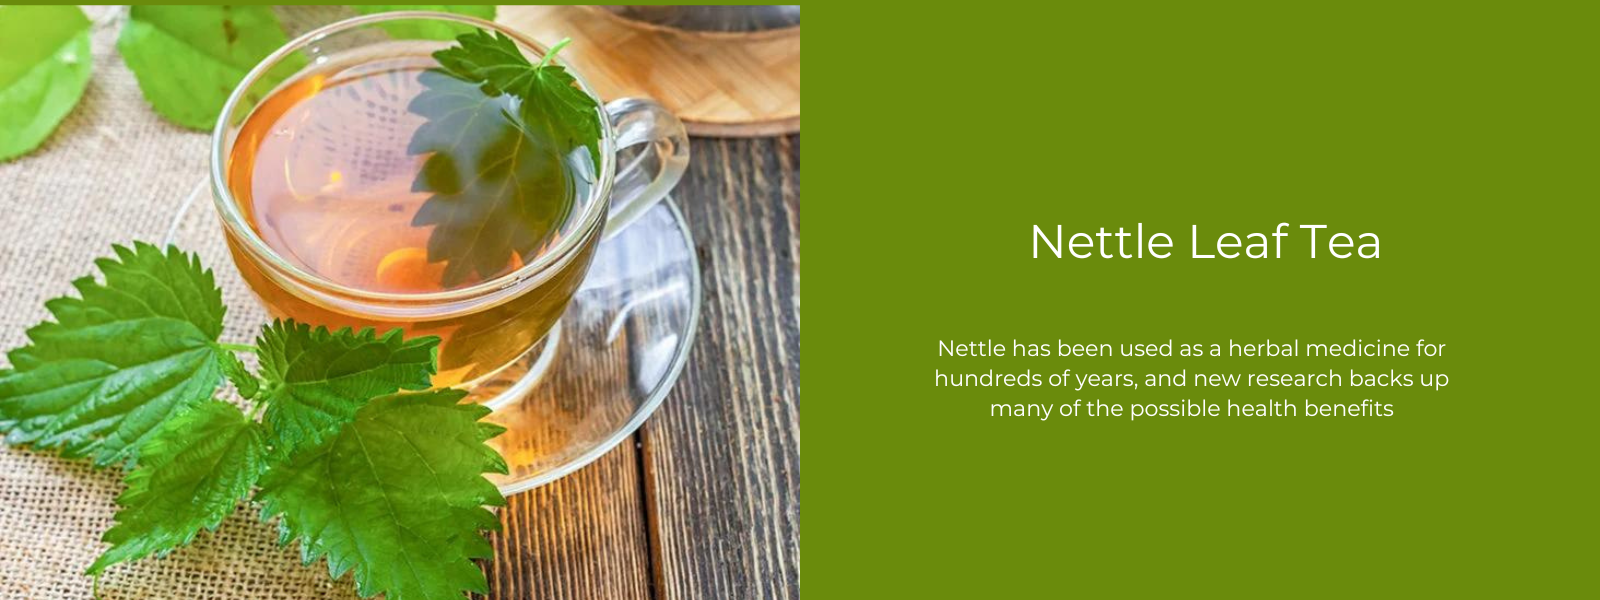 Nettle Leaf Tea - Health Benefits, Uses and Important Facts